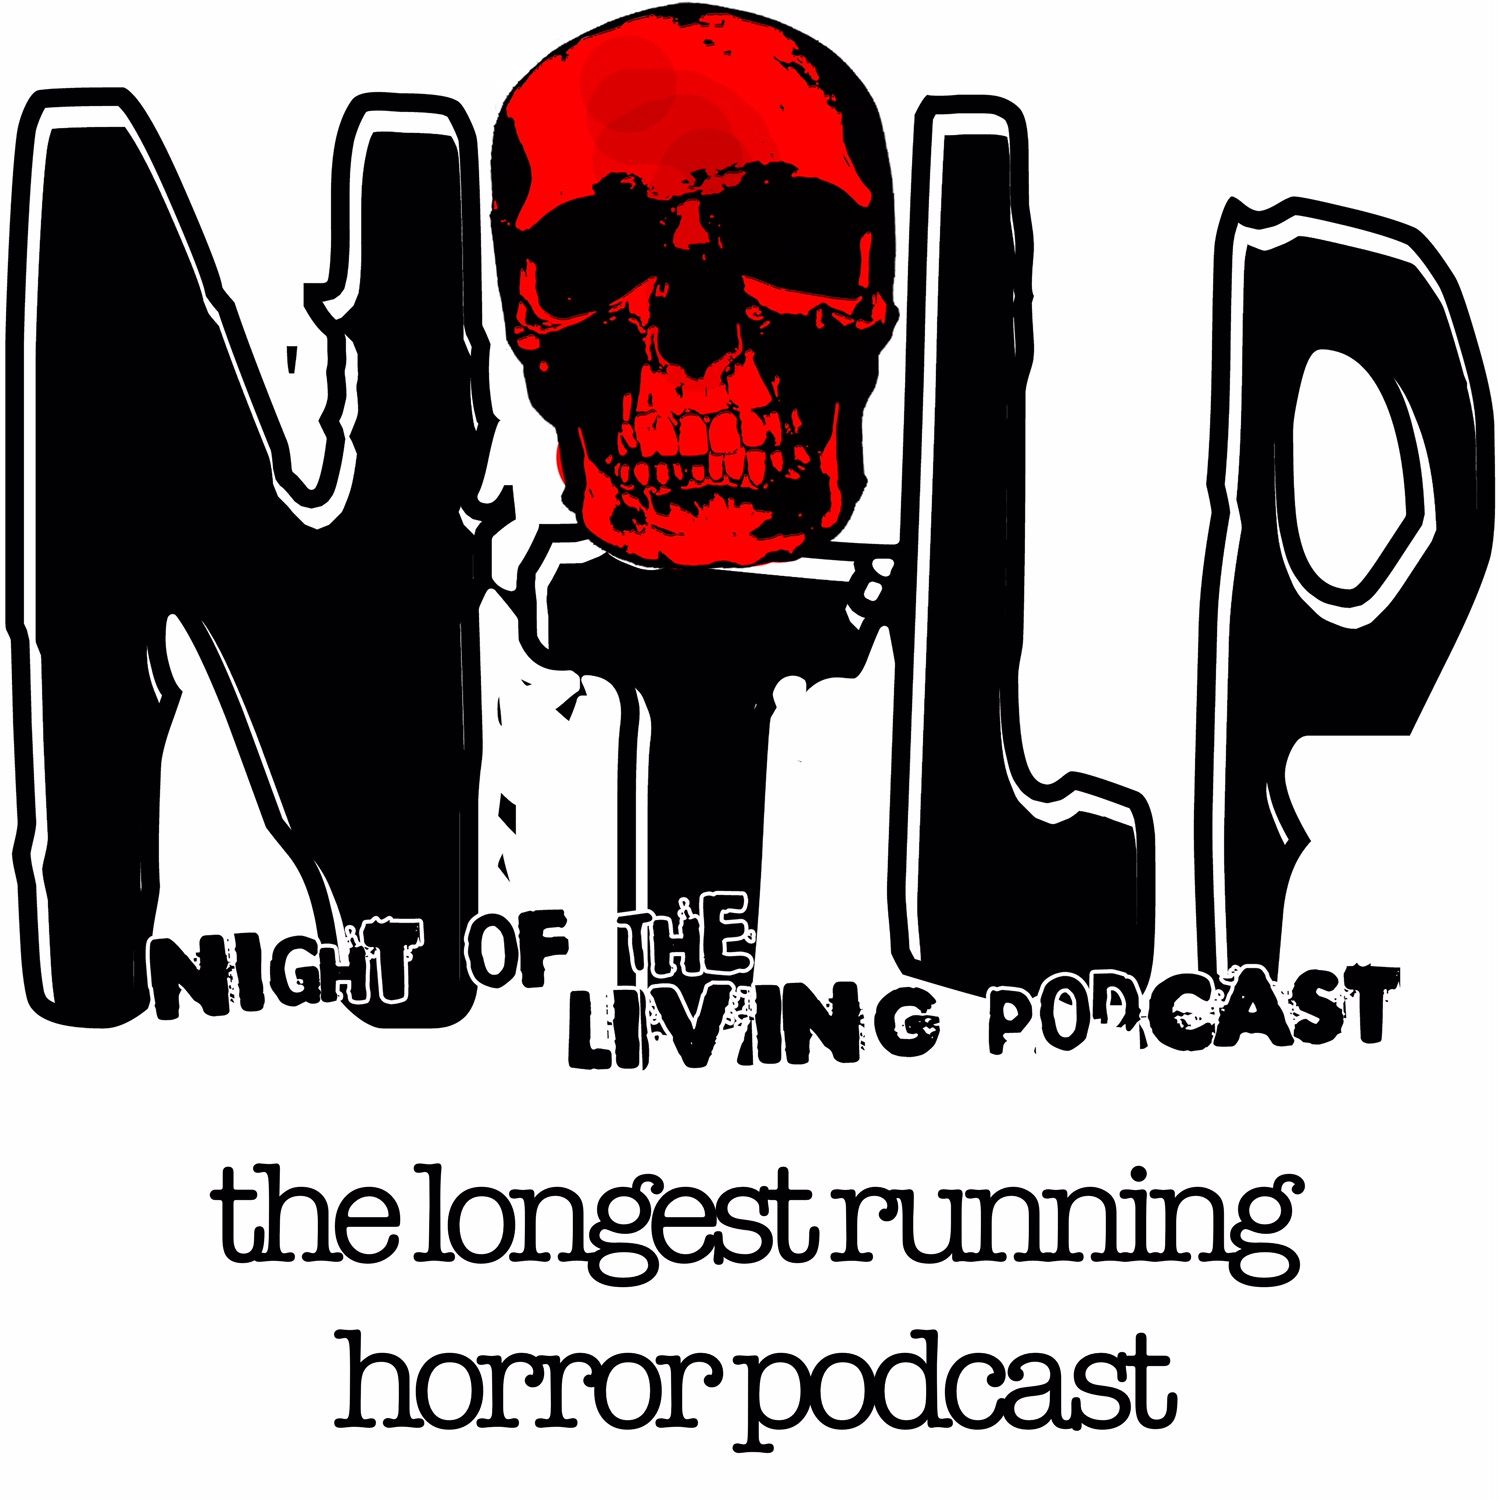 Night Of The Living Podcast interview